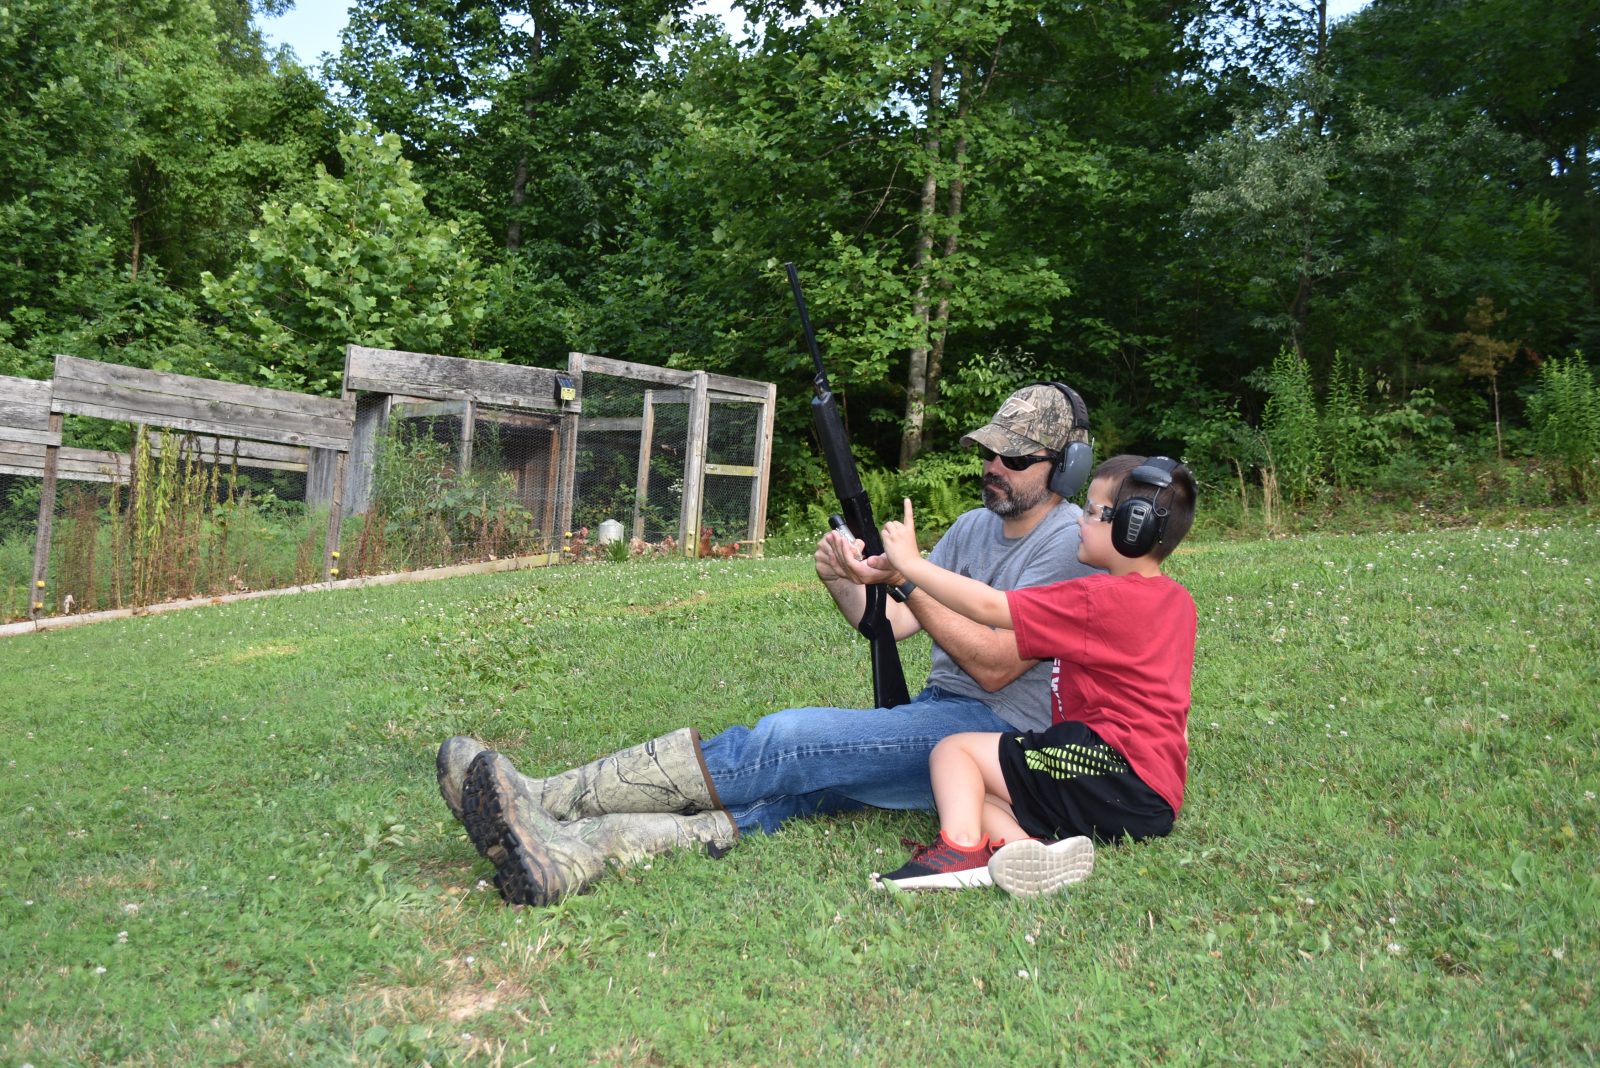 An image of a young child and their father sitting in a meadow with a gun reviewing gun safety